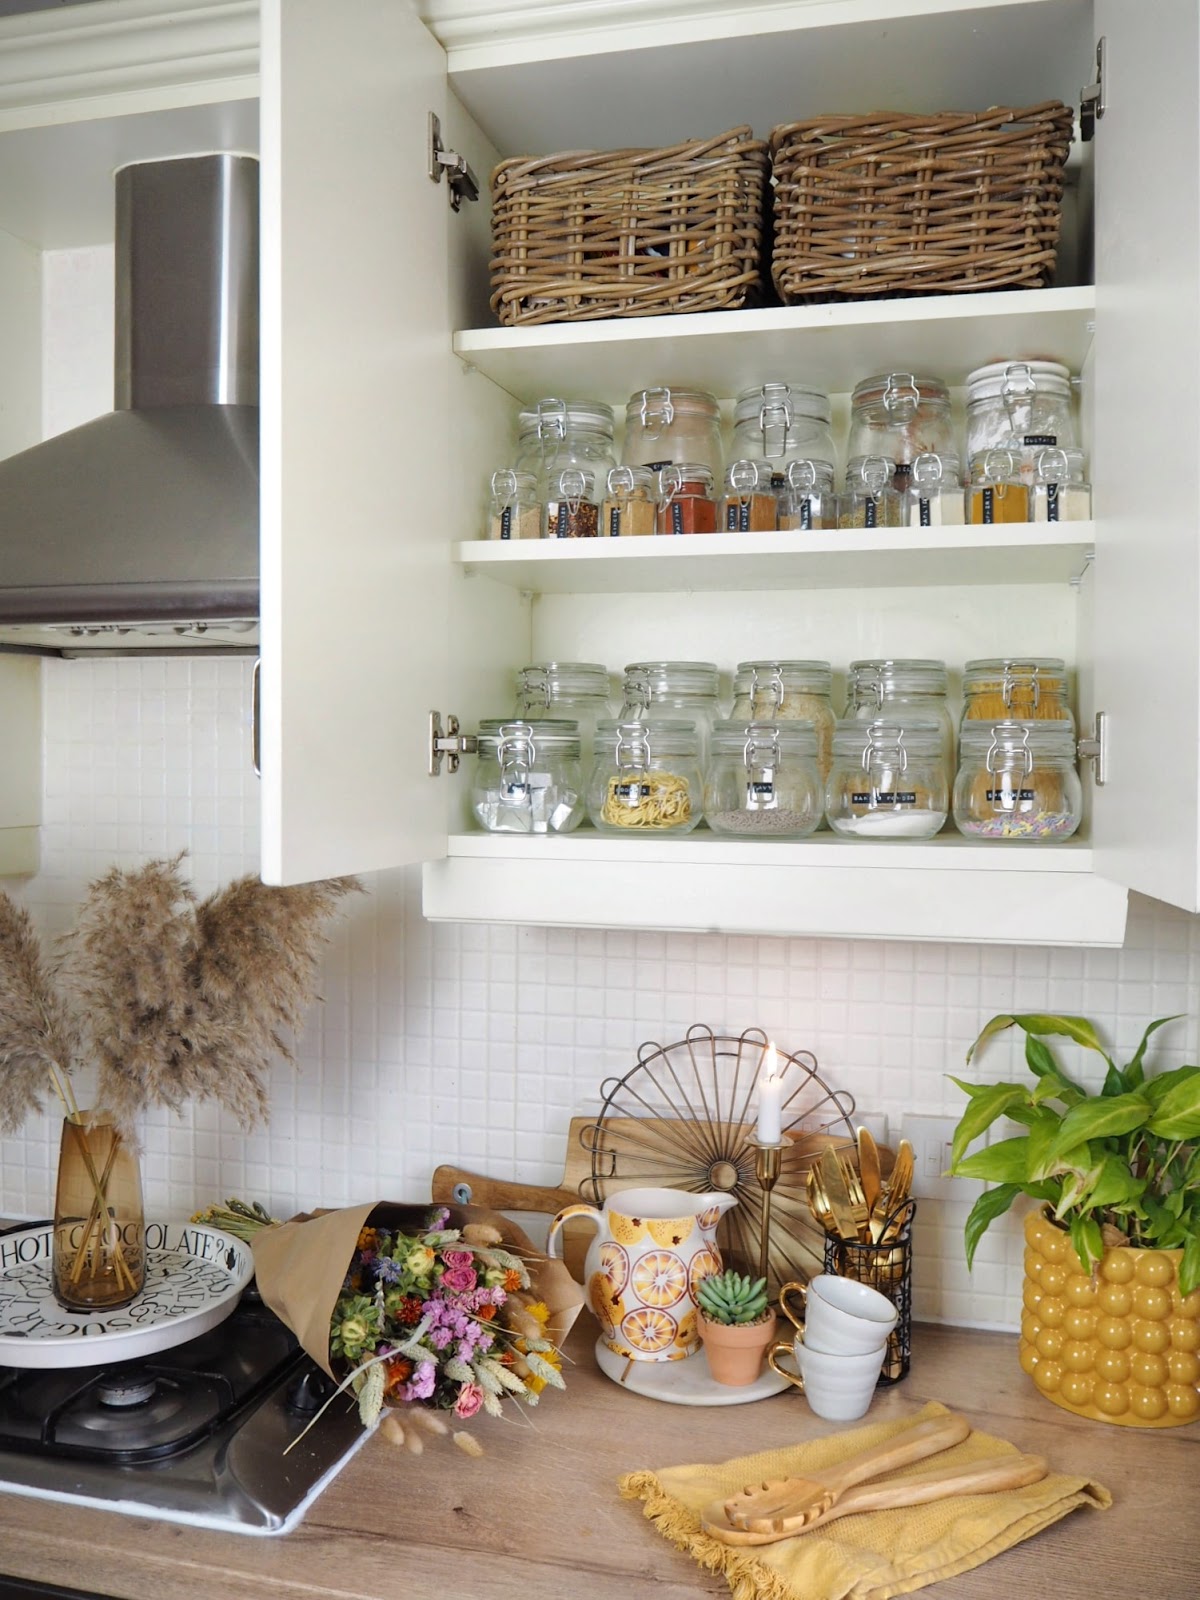 How to create a mini pantry within your kitchen - storage jar inspiration and how to organise dried food within your kitchen cupboards, even if you've only got a small kitchen. Organisational storage tips for small homes. 